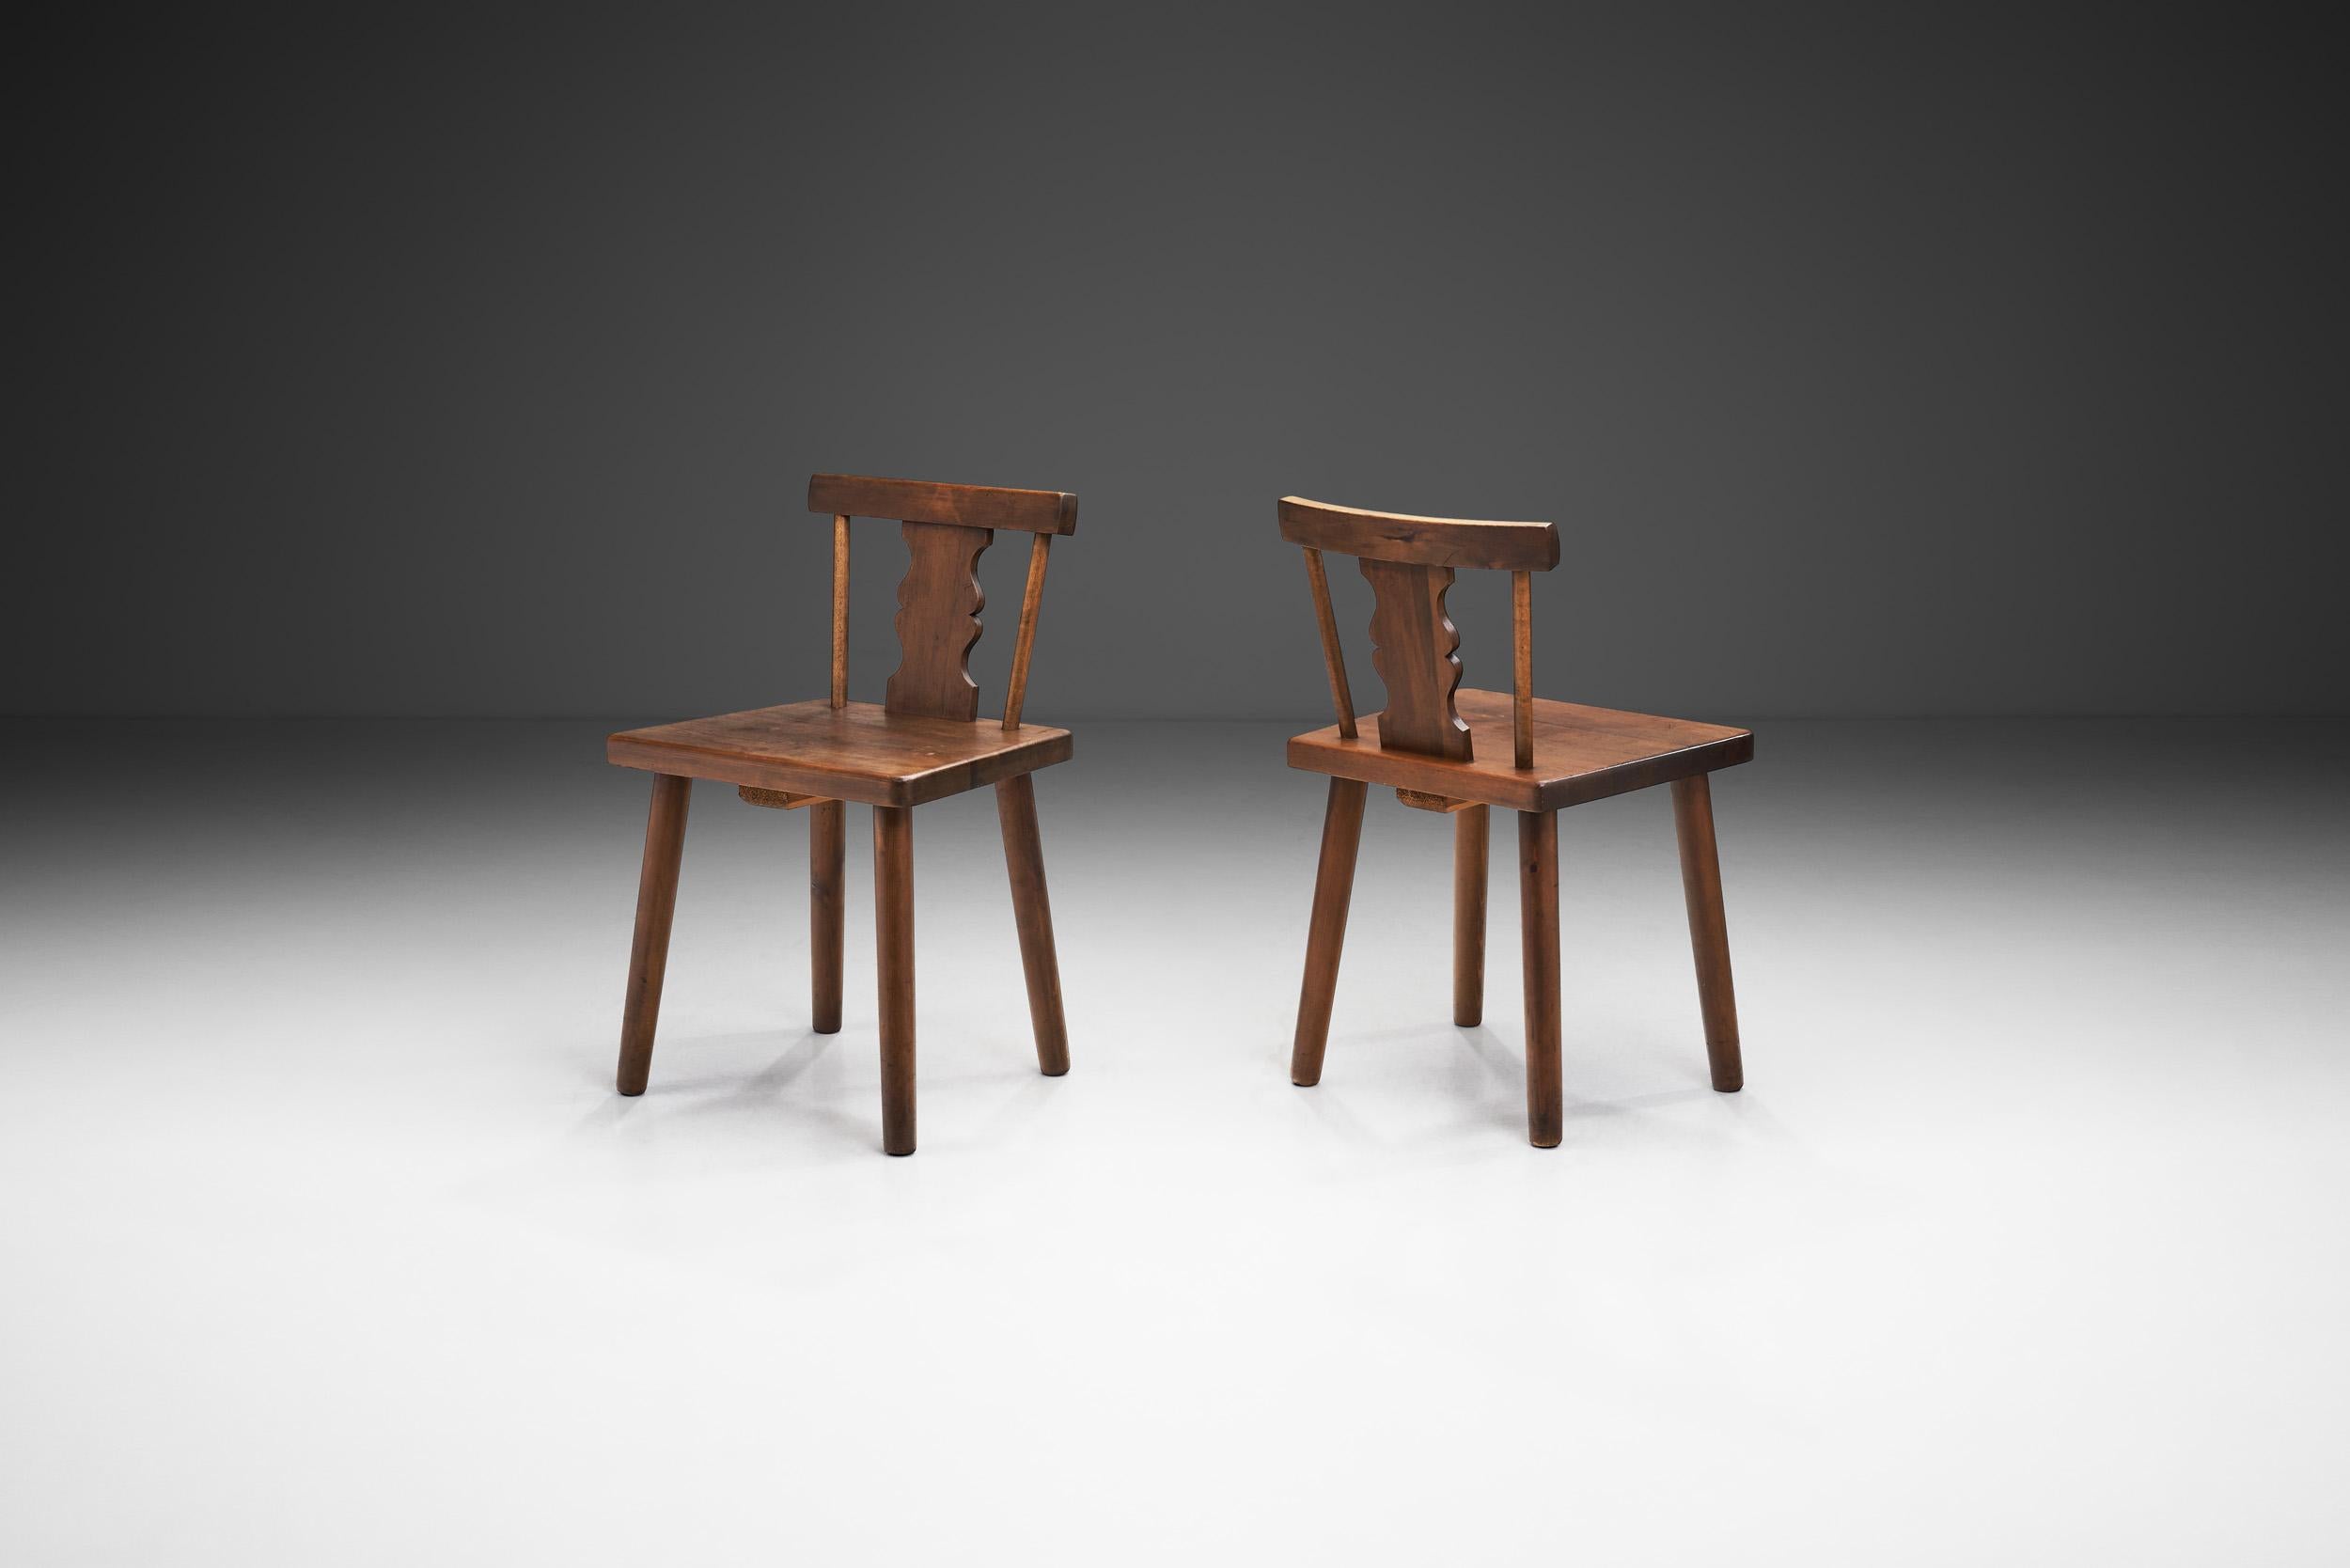 This one-of-a-kind pair stands as evidence to the enduring charm of handcrafted furniture. These chairs tell a story of craftsmanship, history, and the timeless appeal of rustic beauty. These chairs, with their weathered pine and hand-carved backs,